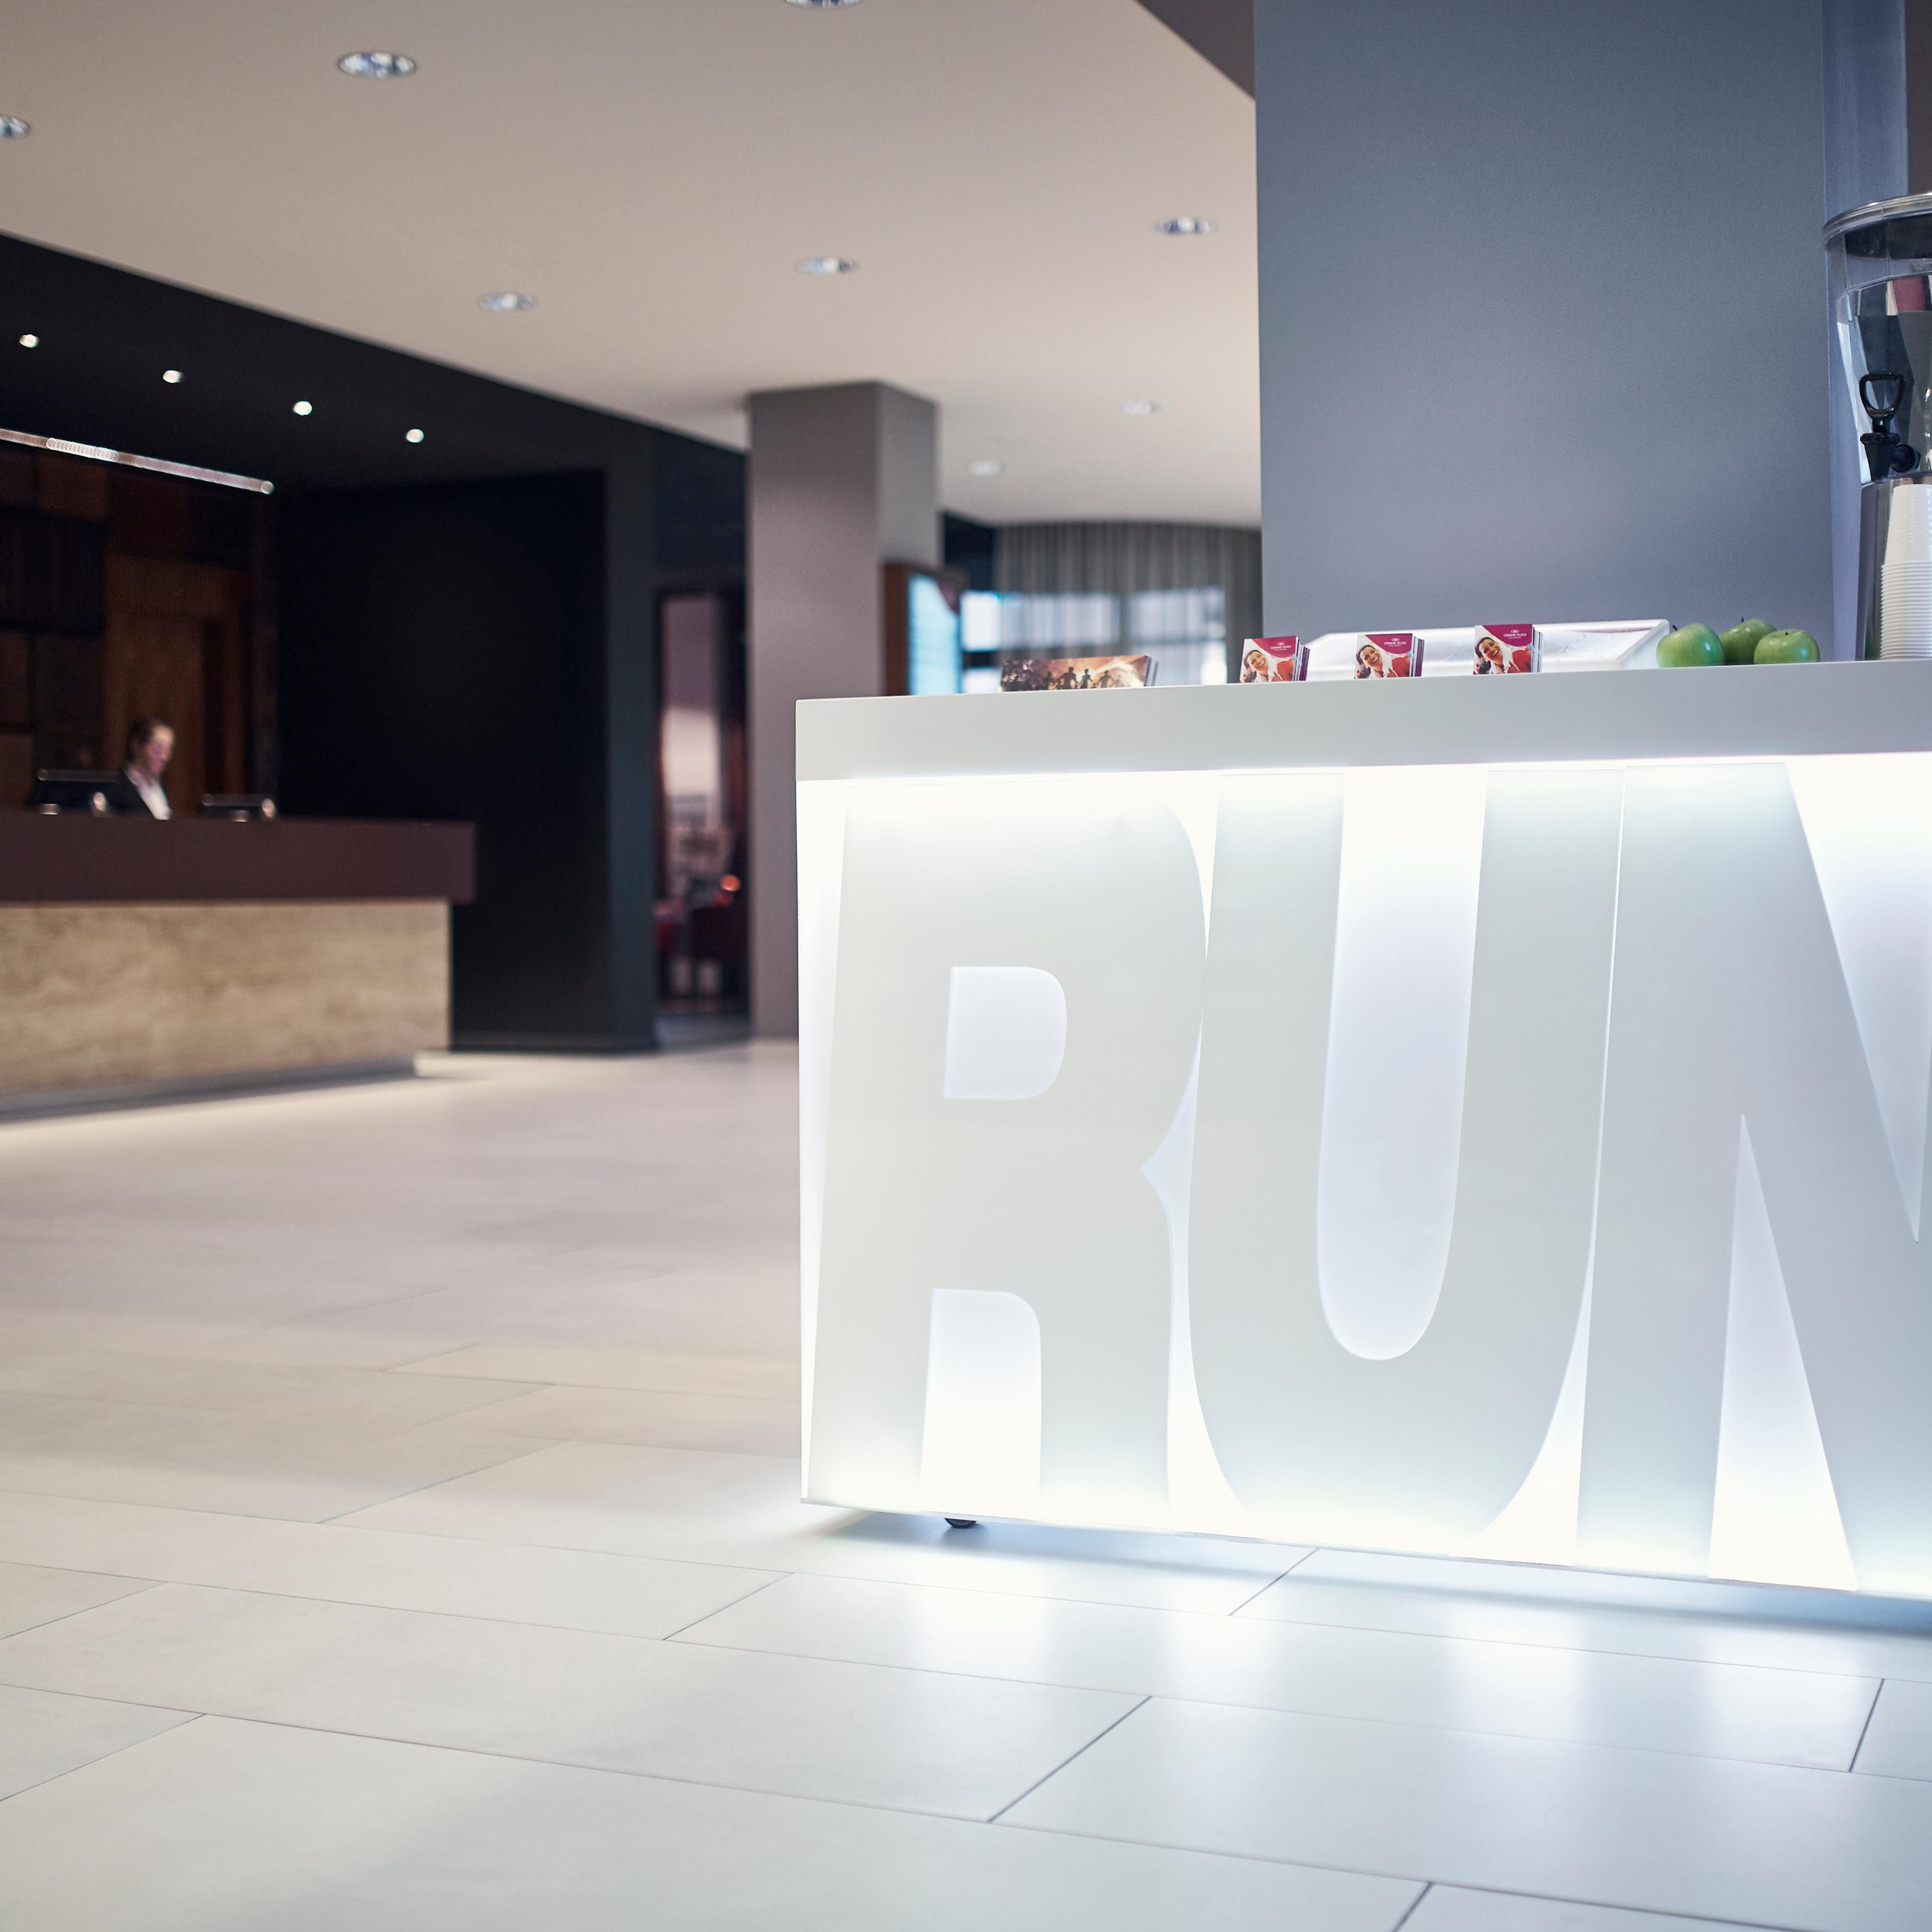 Welcome to our lobby and feel free to check out our Runningstation